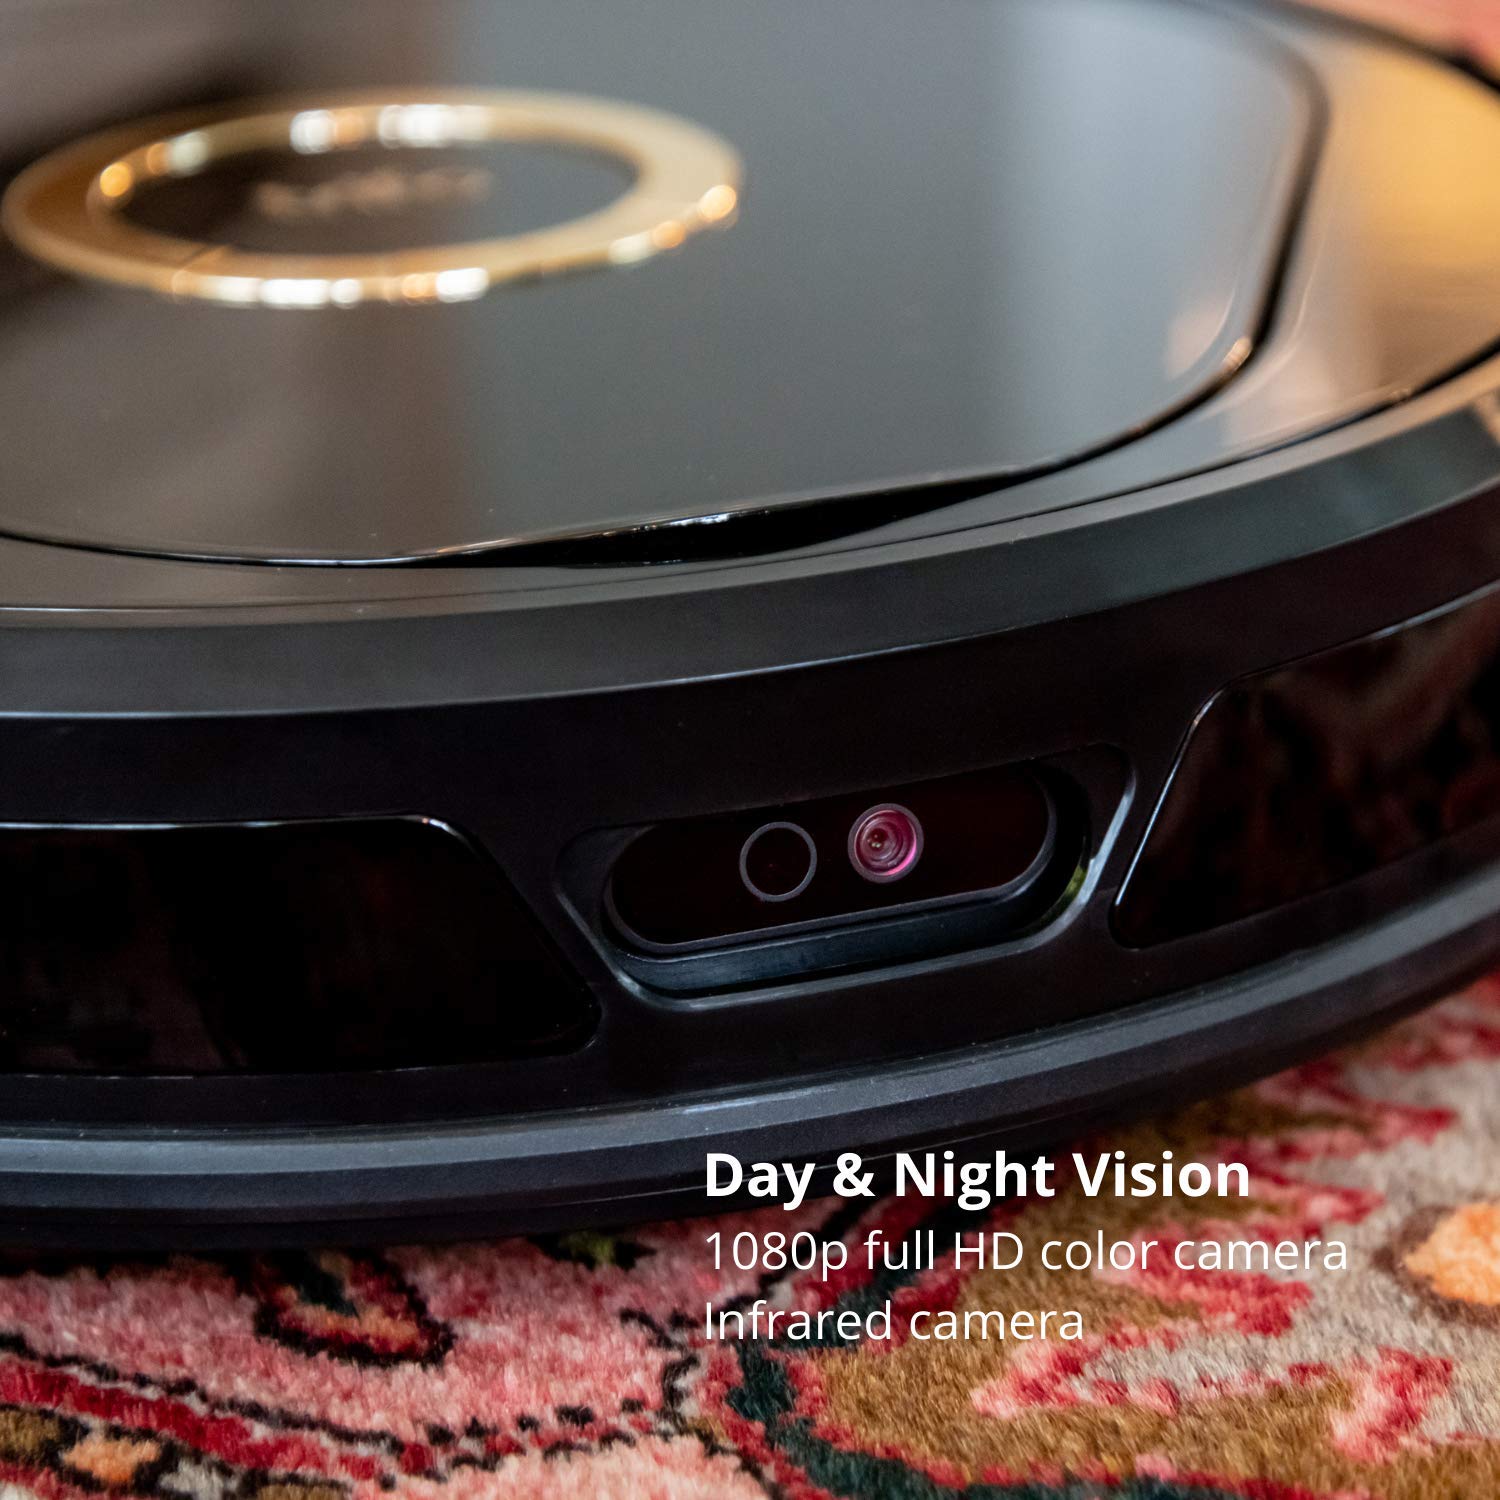 Trifo Lucy AI Home Robot Vacuum with 1080p Full HD Day & Night Vision, Video Recording, Smart Navigation and Mapping, Super Powerful, 3000Pa Suction, Obstacle Avoidance Down to 1", No-go Zones, Pet Hair - image 2 of 7